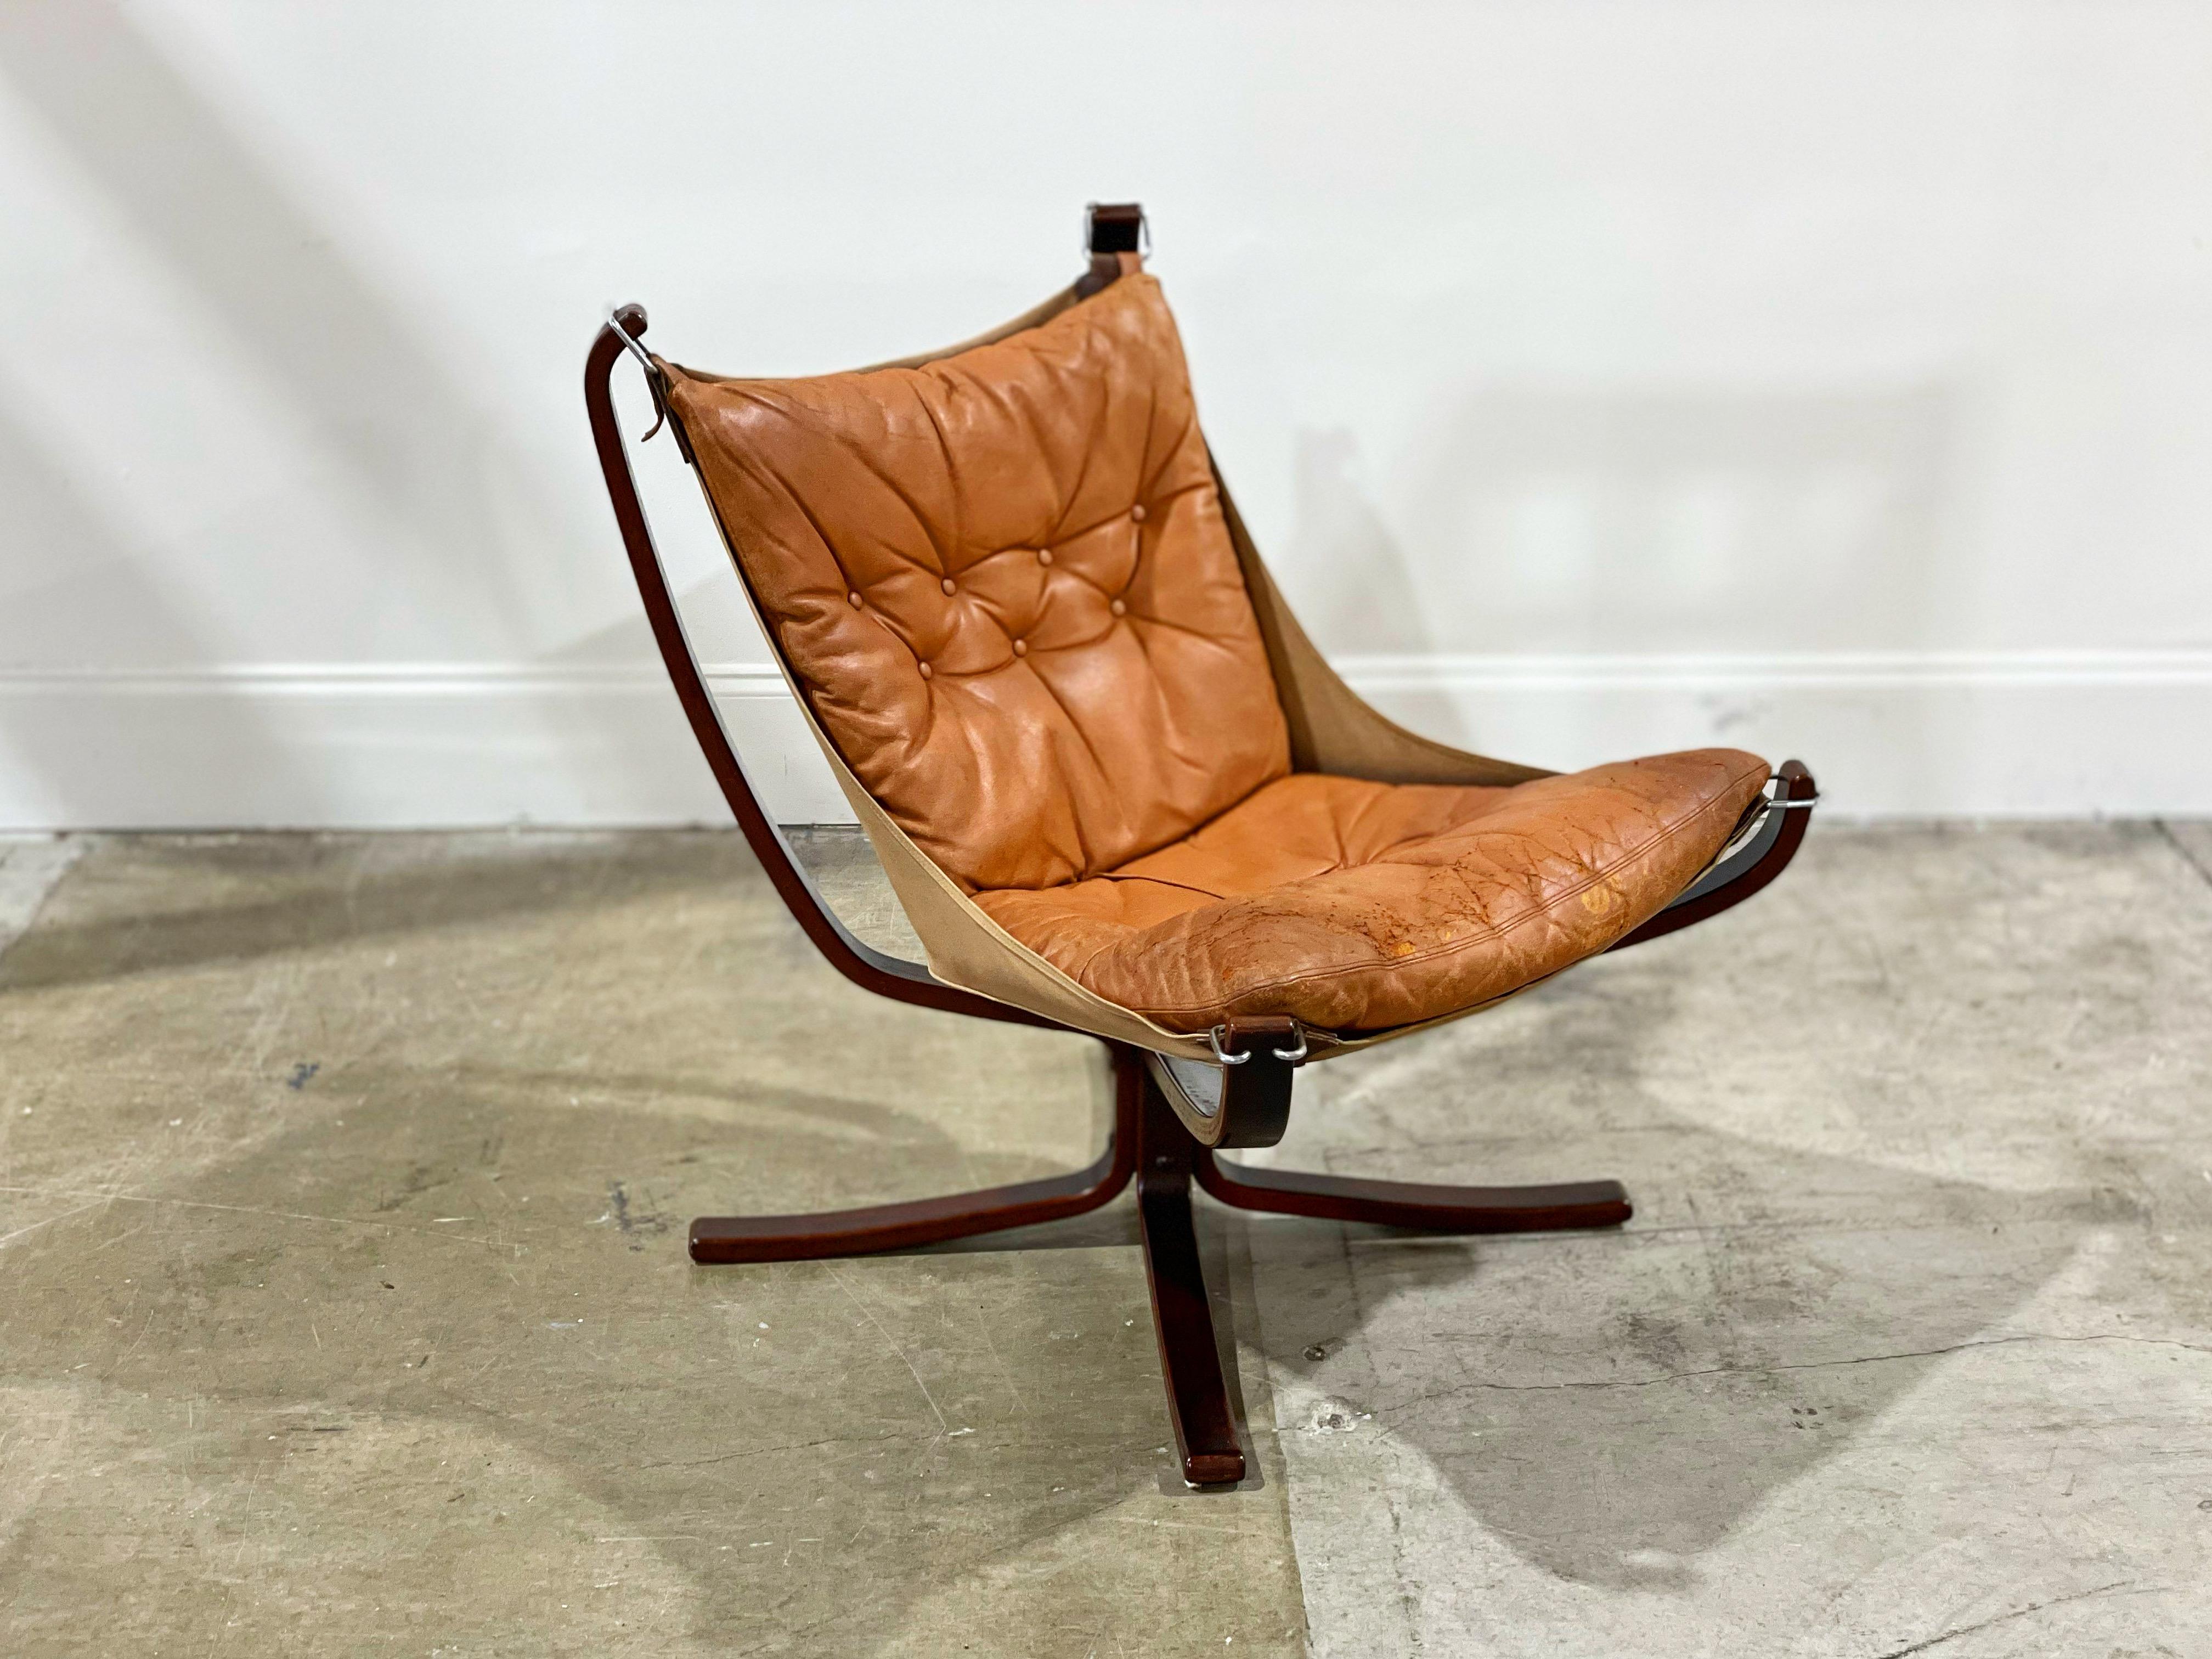 Falcon chair by Sigurd Ressell for Vatne Mobler, Sweden circa 1965. Executed in down filled leather cushions, canvas and chrome sling and a sculptural bent beechwood frame. An iconic and timeless design - it's hard to beat the silhouette and the